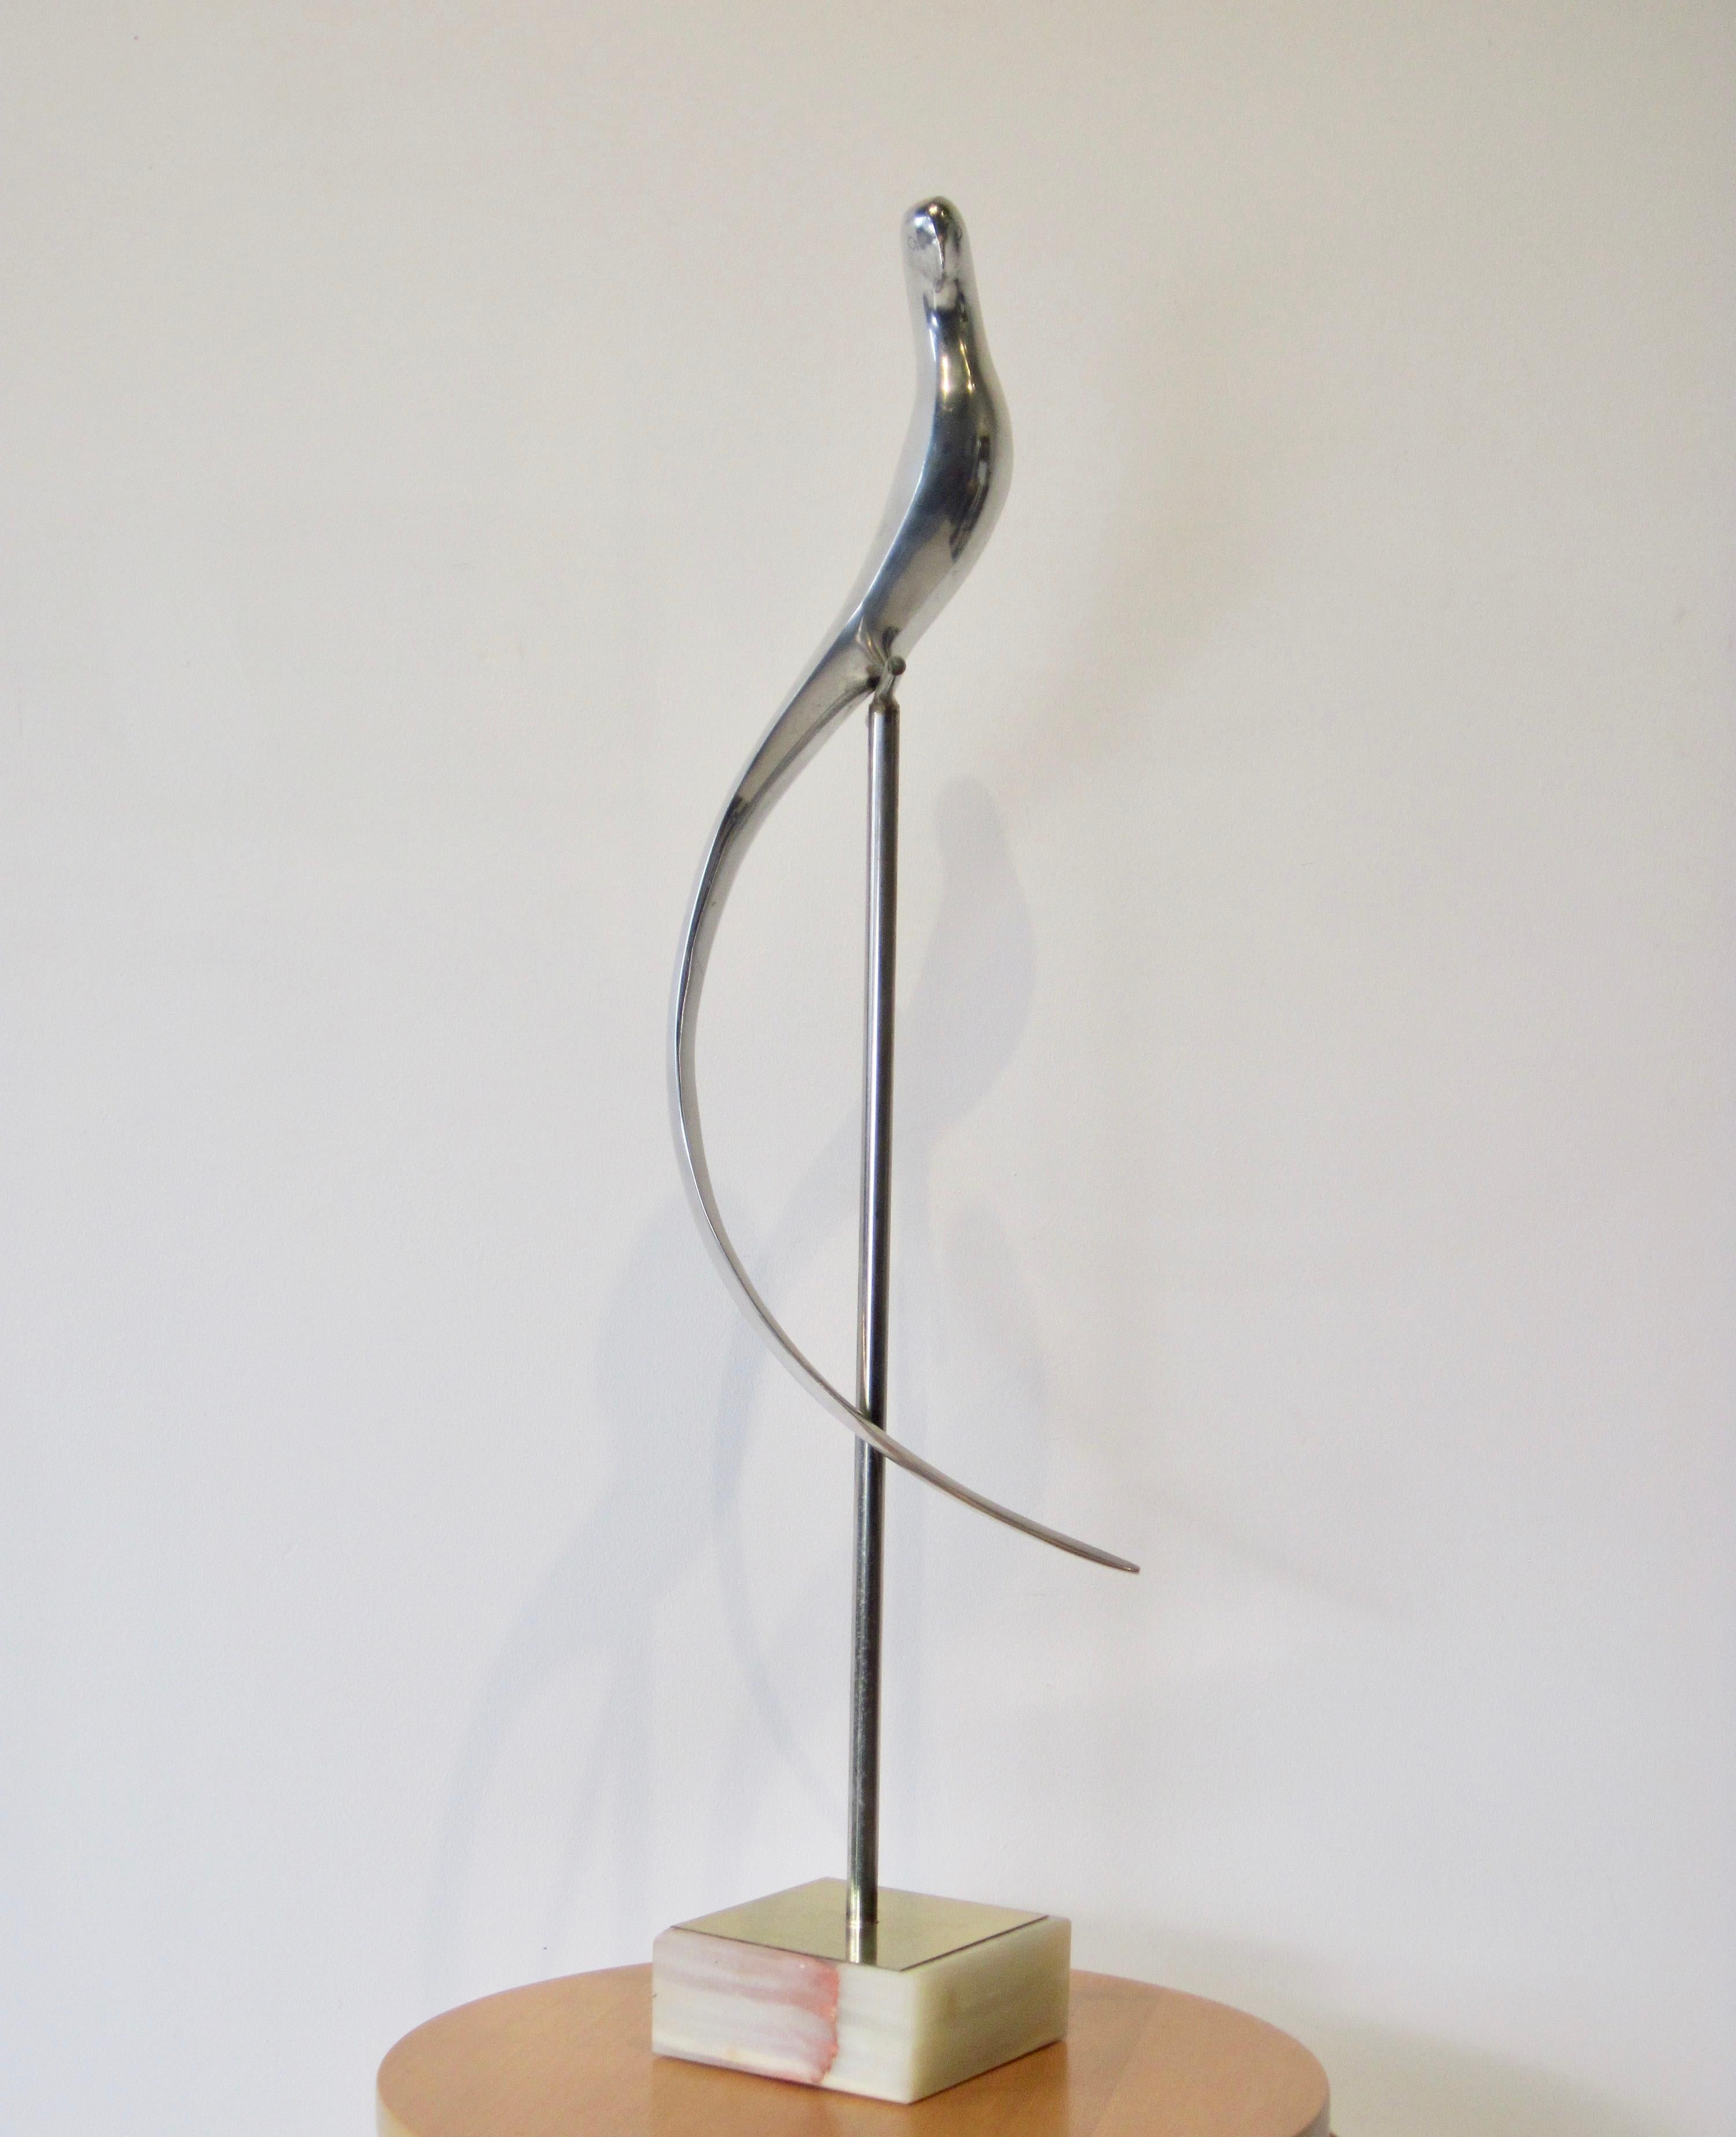 A solid aluminum stylized parrot on a perch sculpture by Curtis Jeré. The elongated curved feathers are elegantly dramatic. Square marble base with brass finishing detail. This item is two pieces and will be wrapped separate within one box for